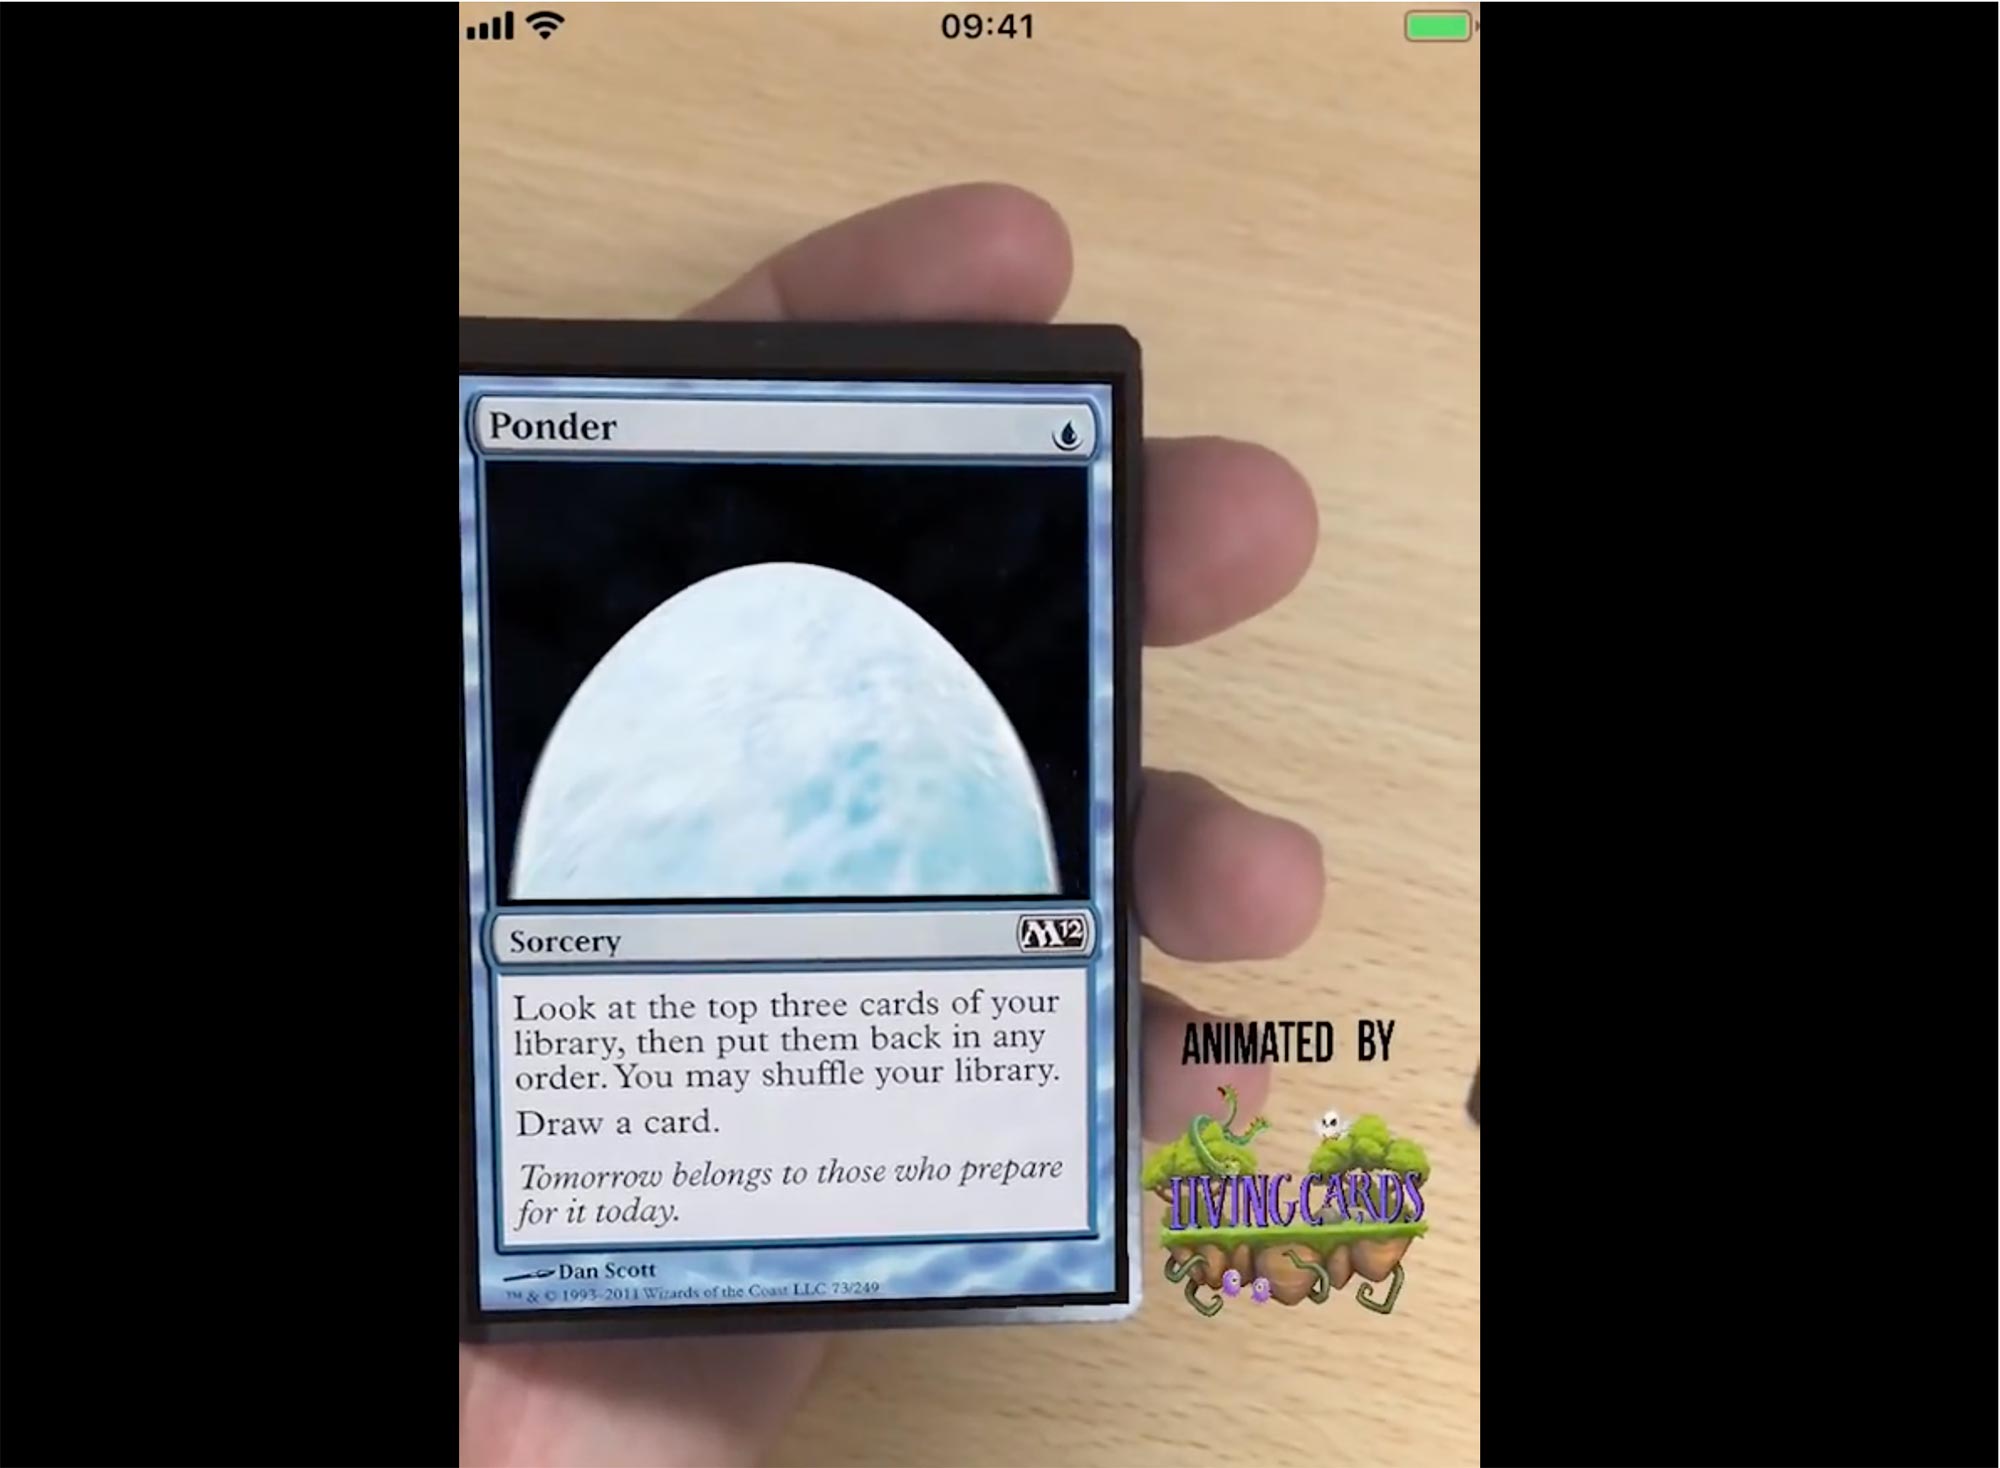 The Magic of AR: the example of the "Gathering Cards"